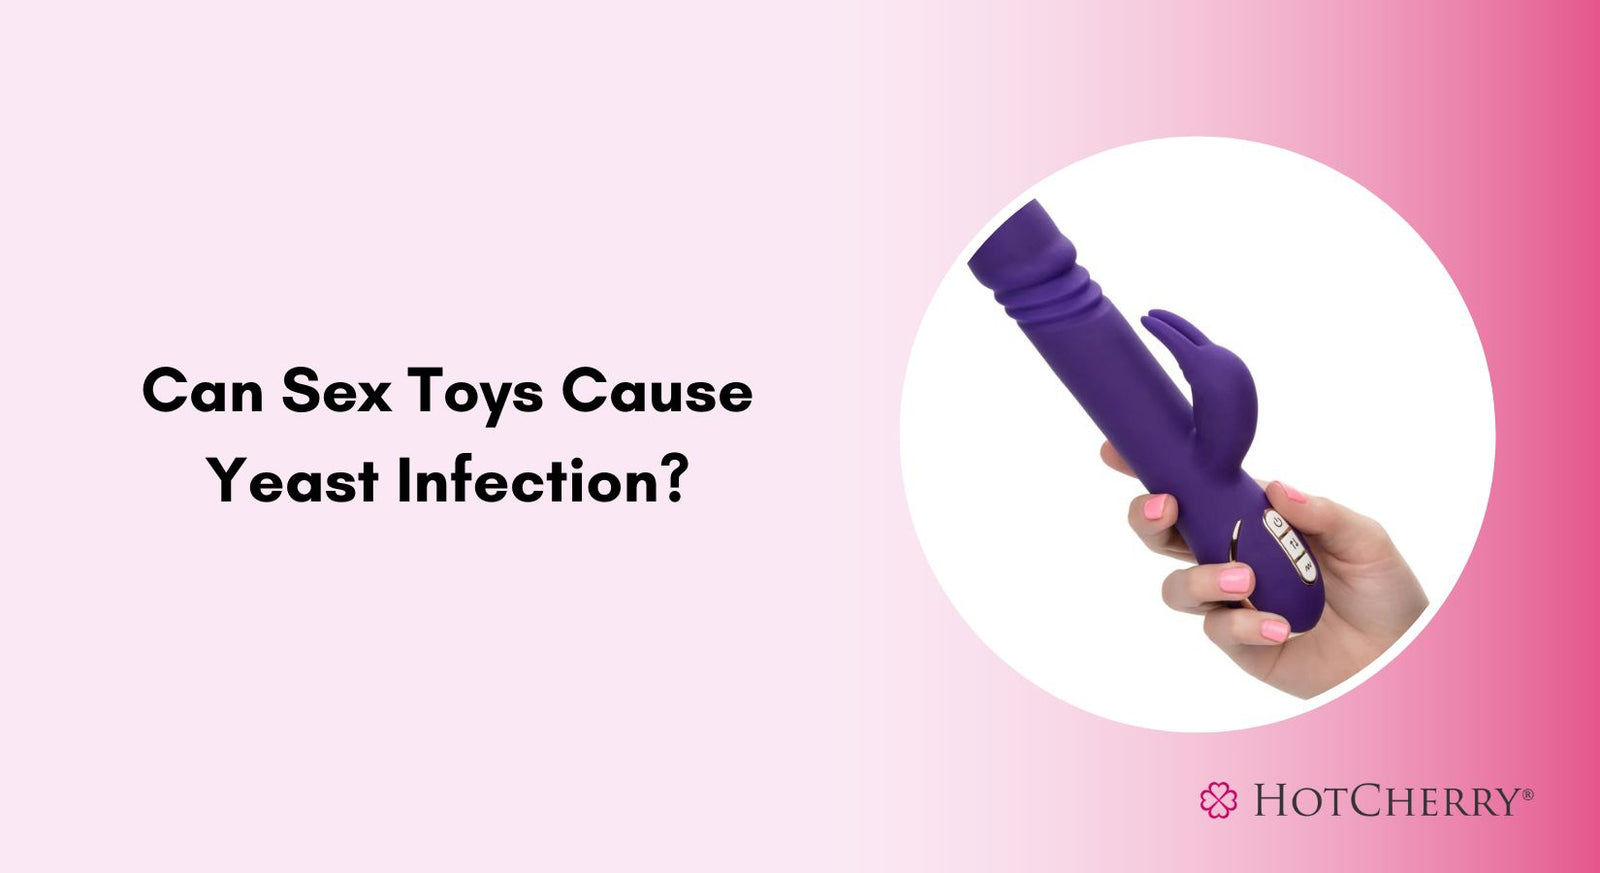 Can Sex Toys Cause Yeast Infection?